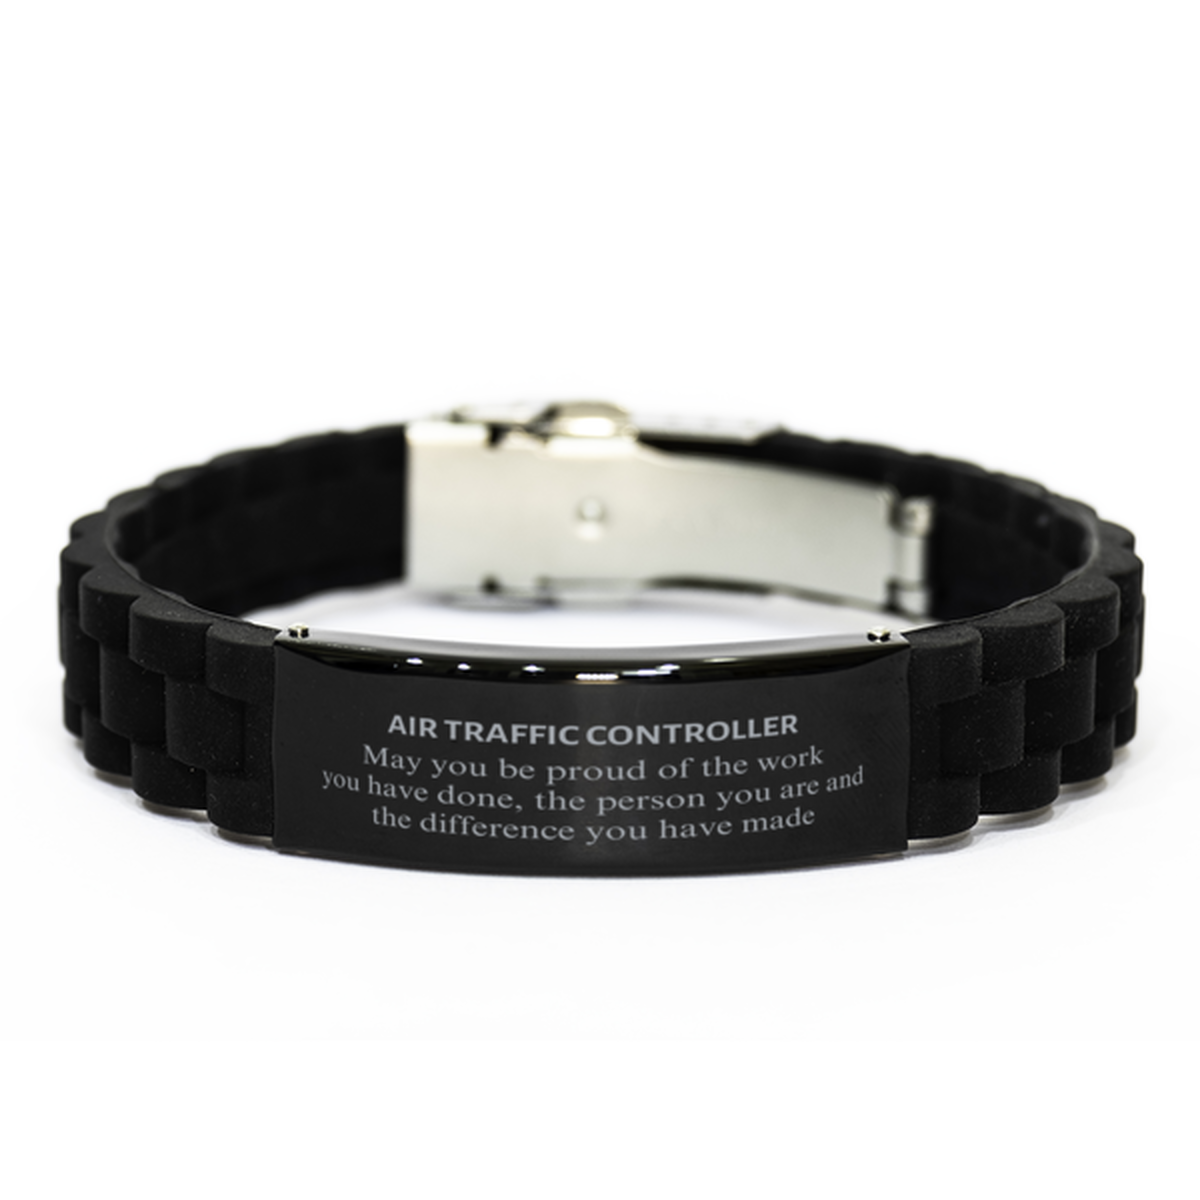 Air Traffic Controller May you be proud of the work you have done, Retirement Air Traffic Controller Black Glidelock Clasp Bracelet for Colleague Appreciation Gifts Amazing for Air Traffic Controller